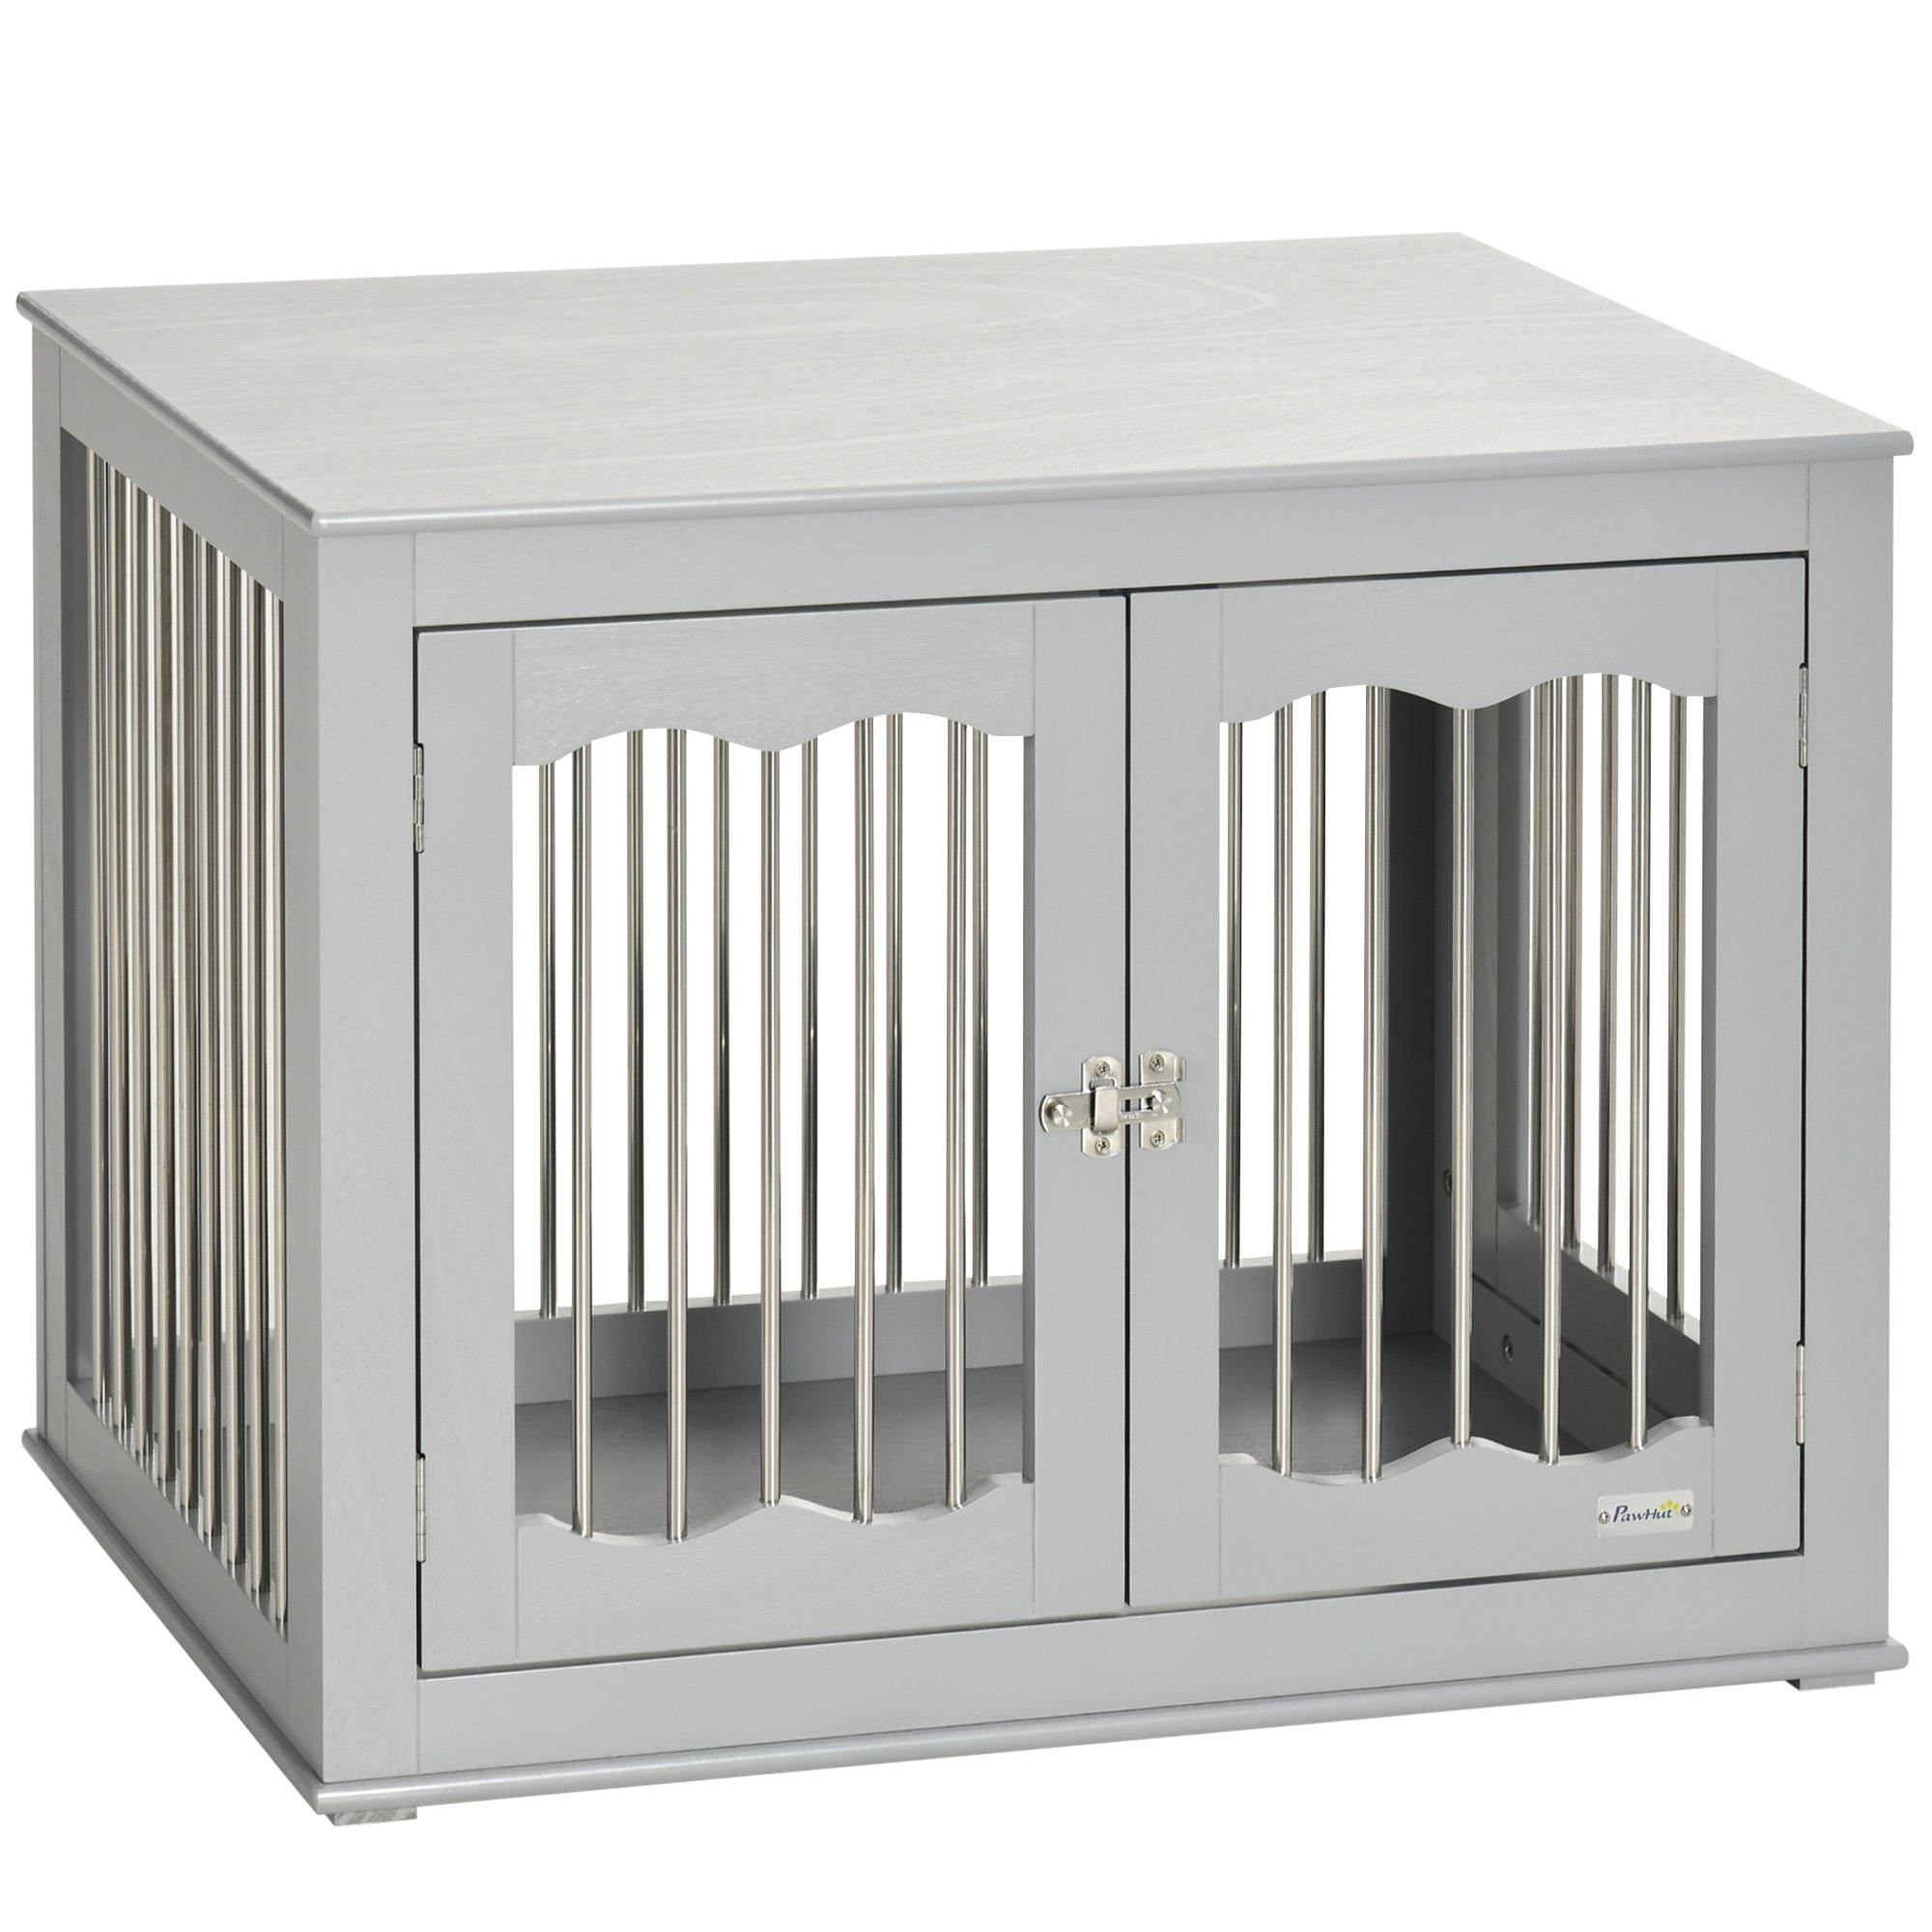 Dog Crate Furniture with Three Doors, Locks and Latches, for Medium Dogs